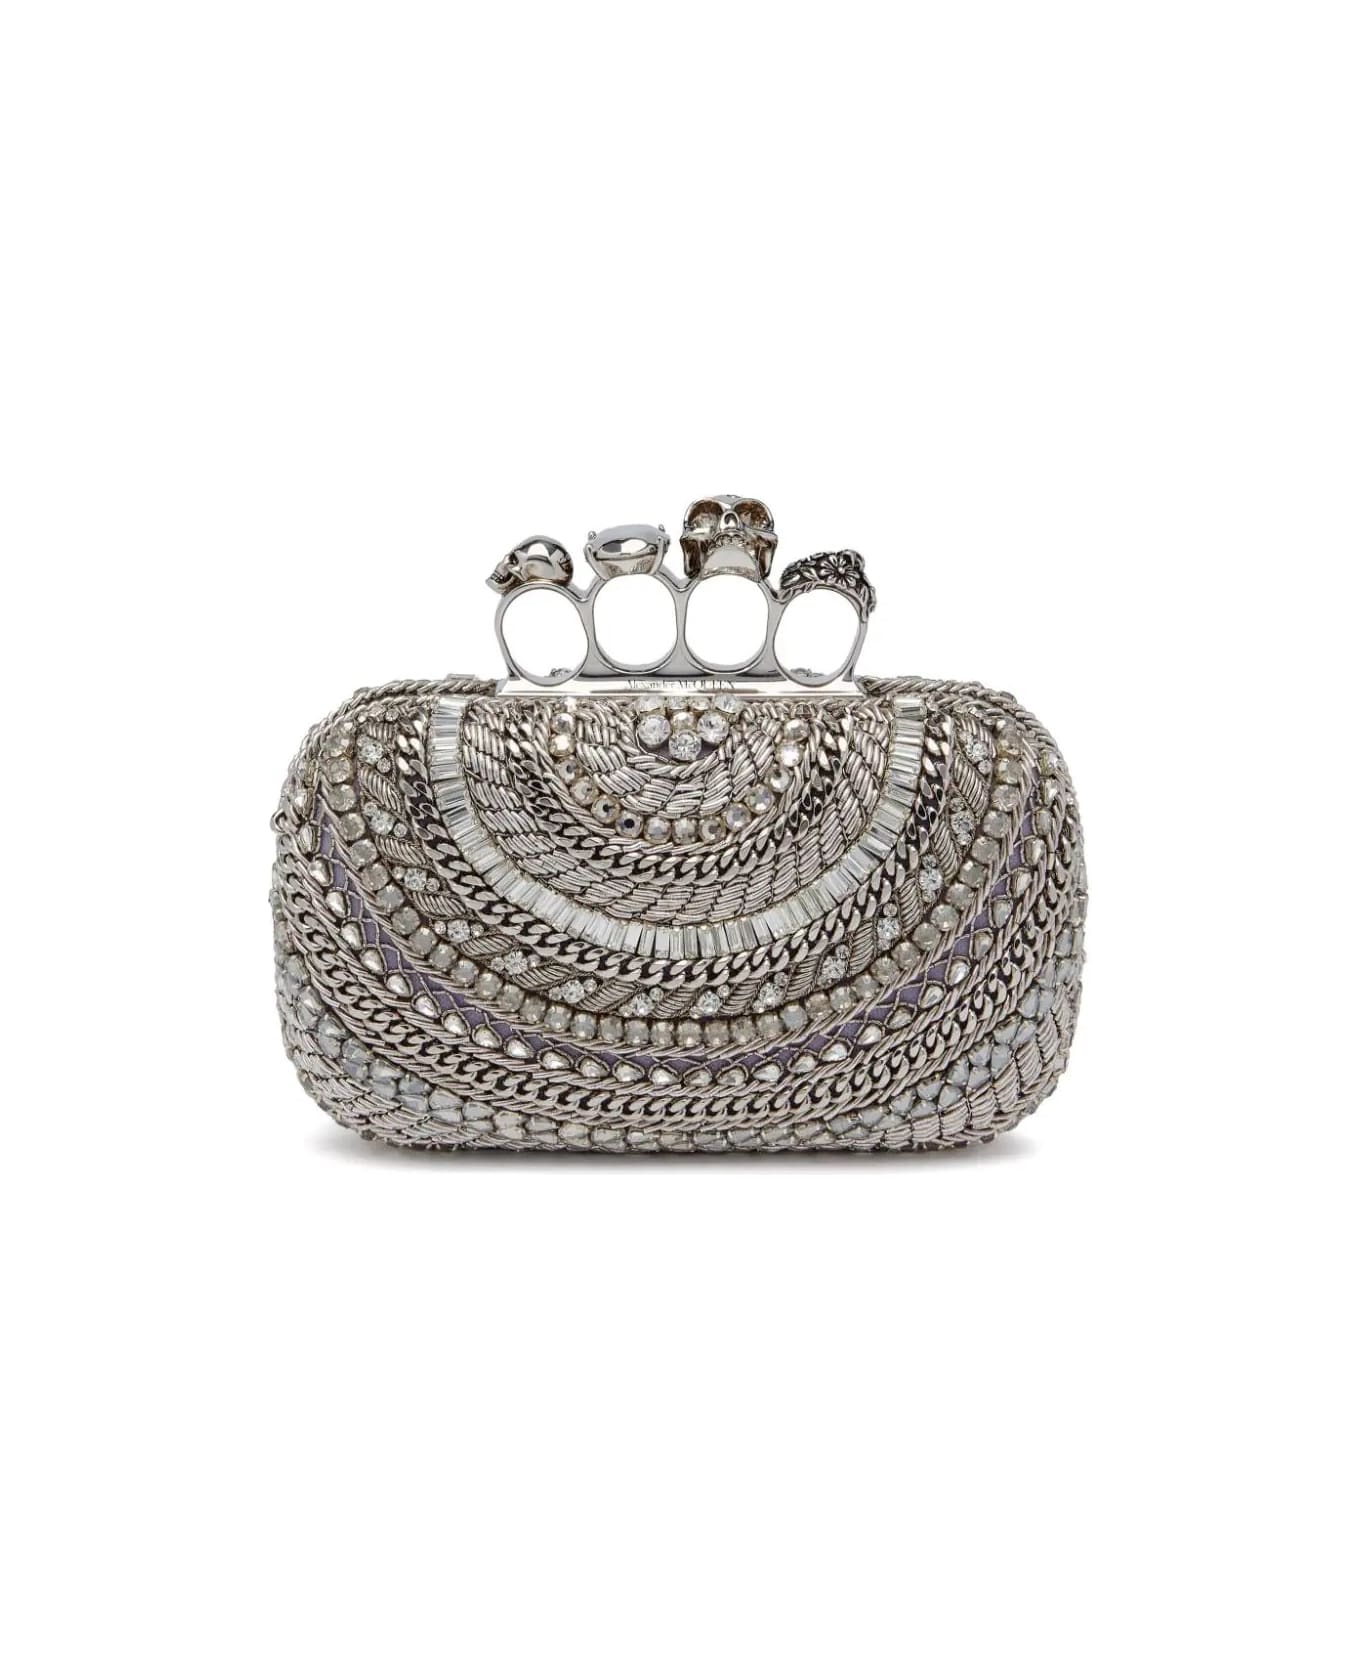 Alexander McQueen The Knuckle Clutch Bag In Silver - Silver クラッチバッグ